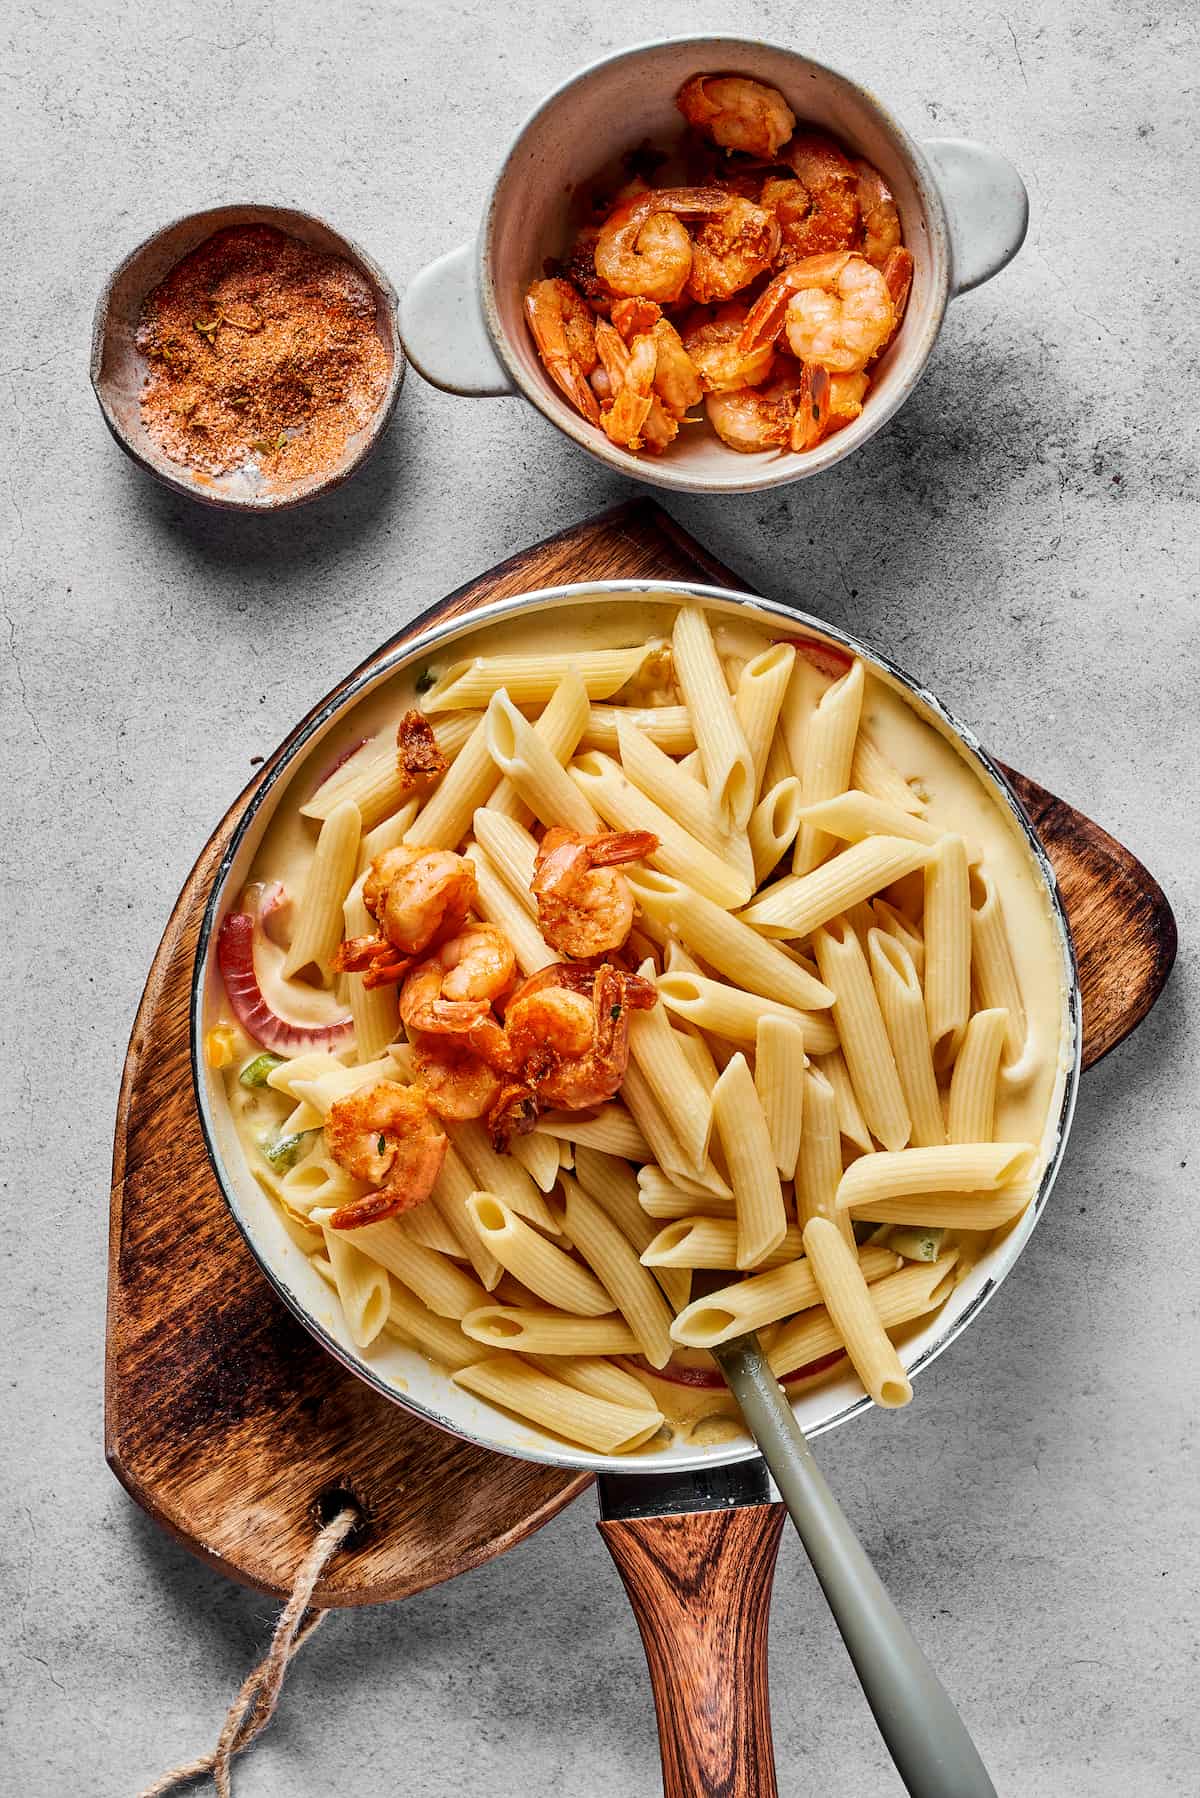 Shrimp and pasta being mixed into a skillet of sauce.